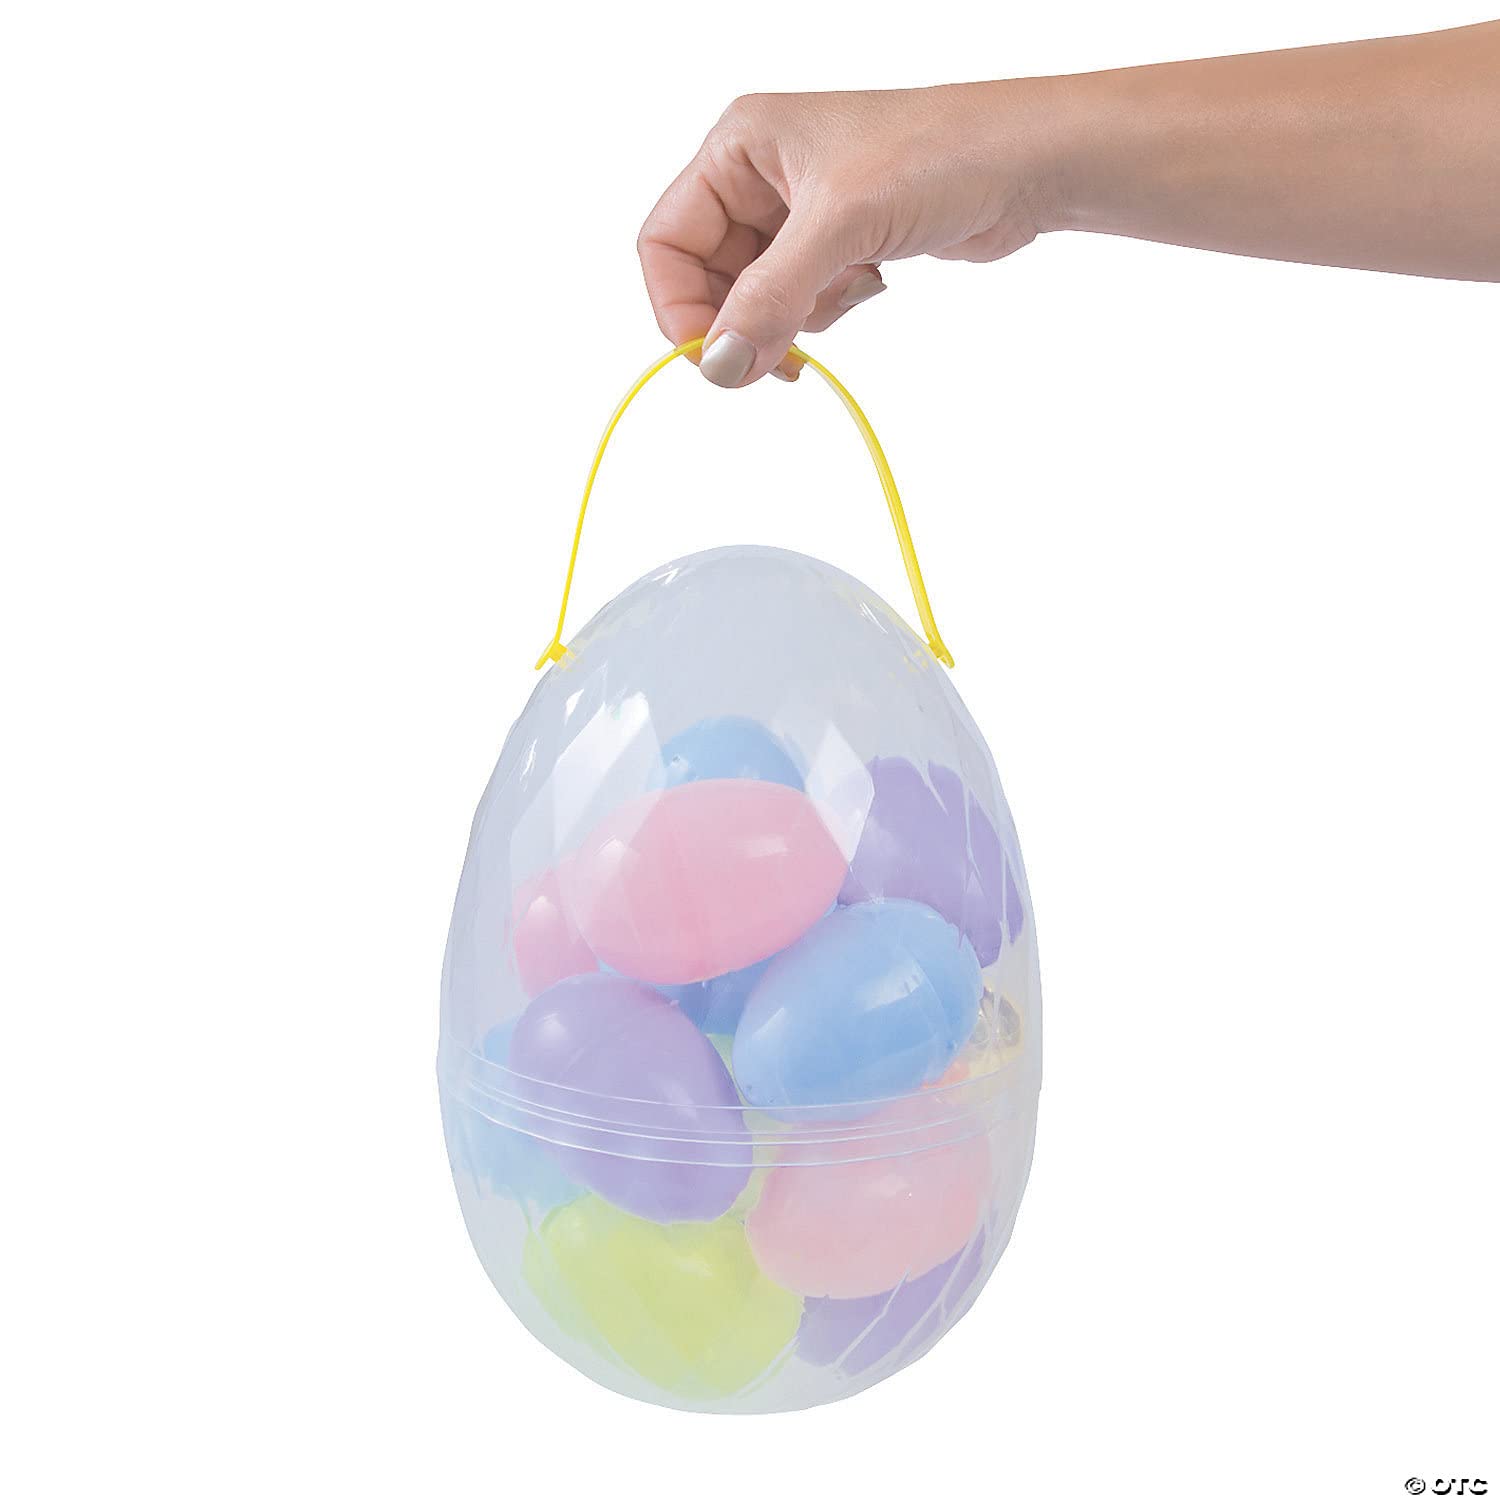 Large Easter Egg Container Filled with 17 Plastic Easter Eggs - Easter Supplies and Decor